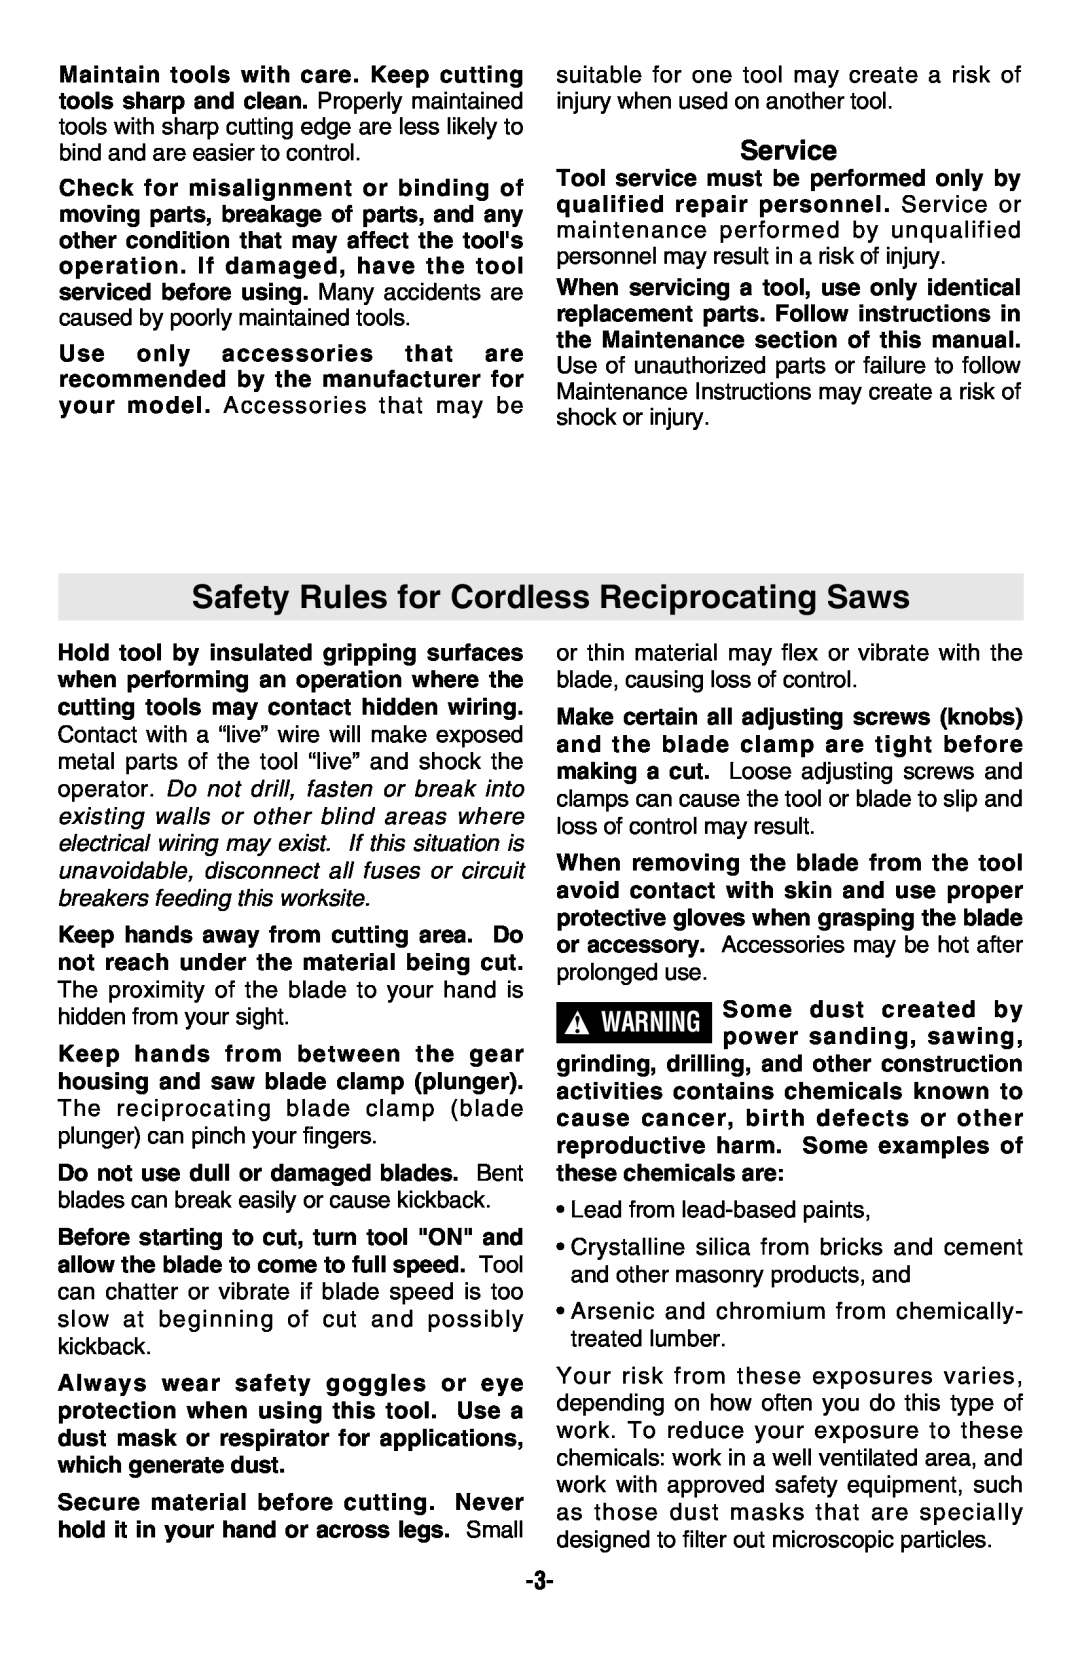 Skil 9350 manual Safety Rules for Cordless Reciprocating Saws, Service 